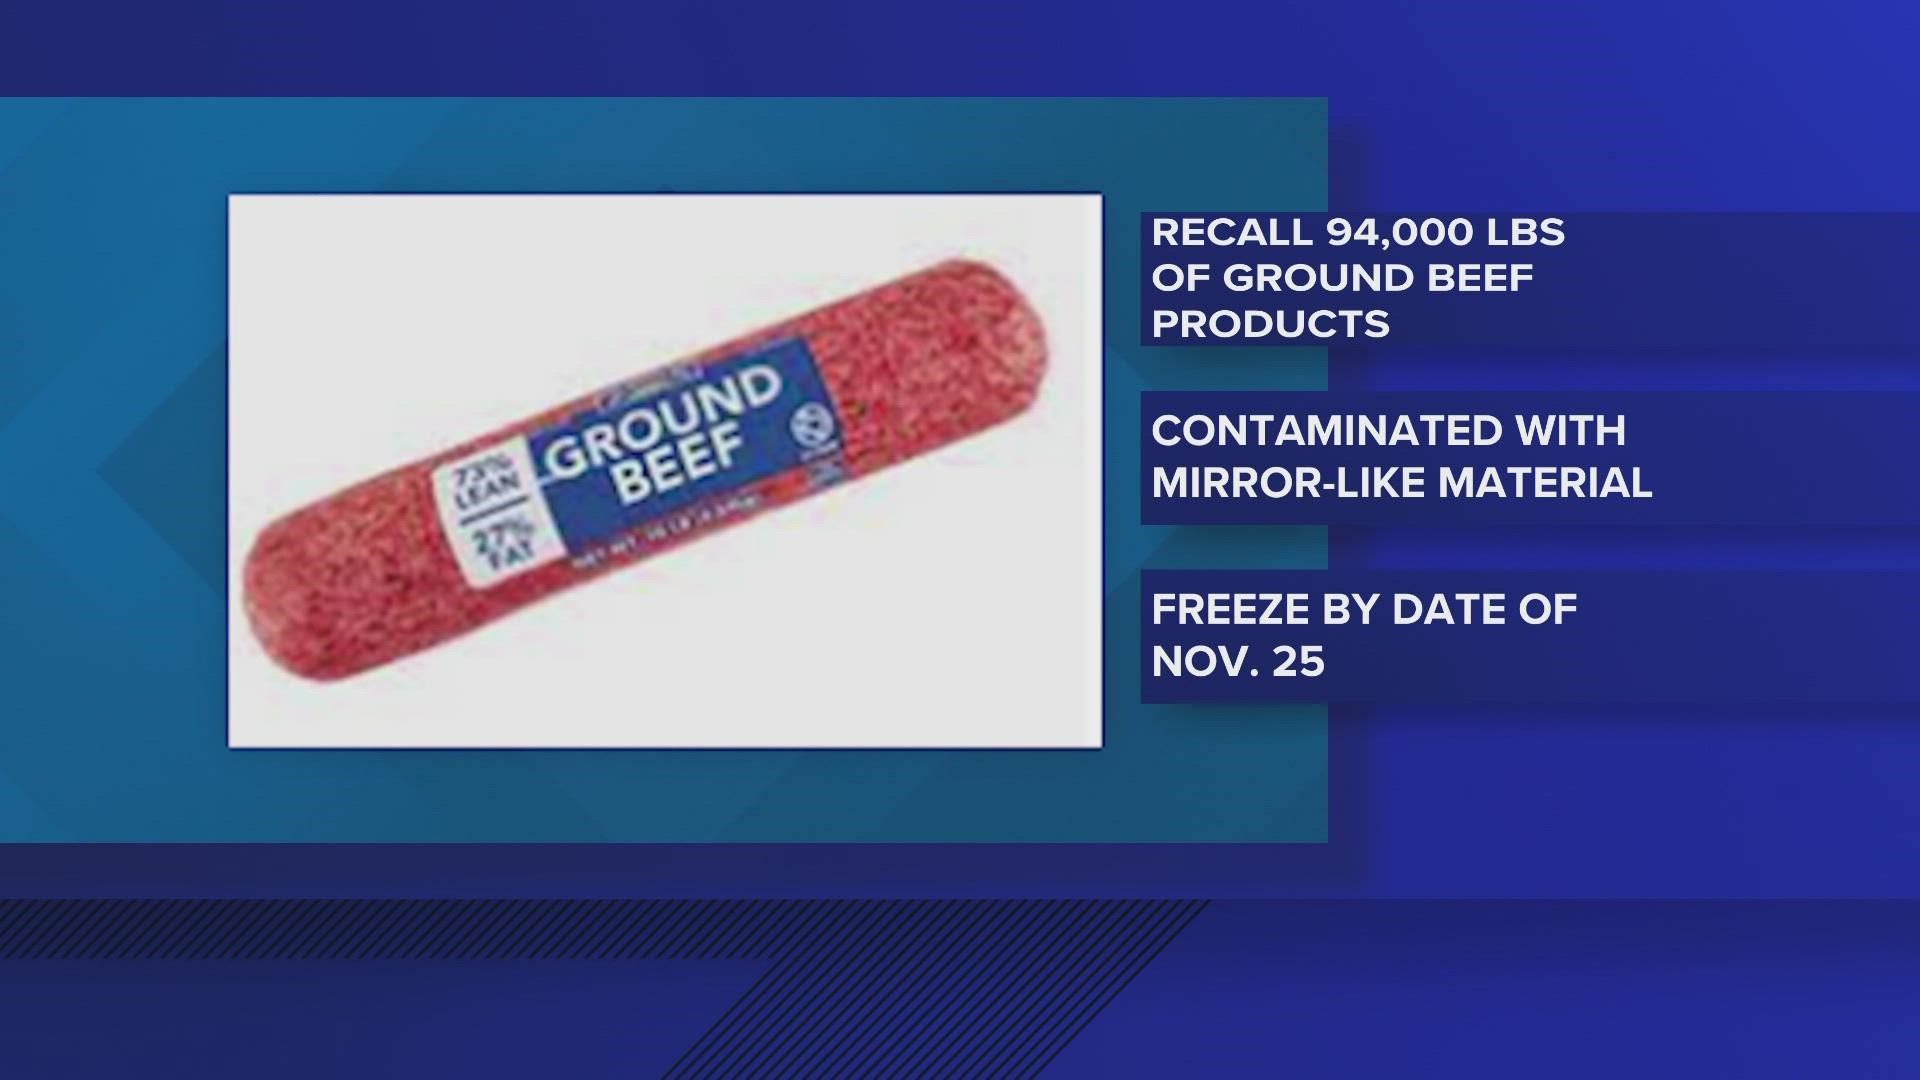 The Texas grocer says the products are specifically from the company's Amarillo facility.